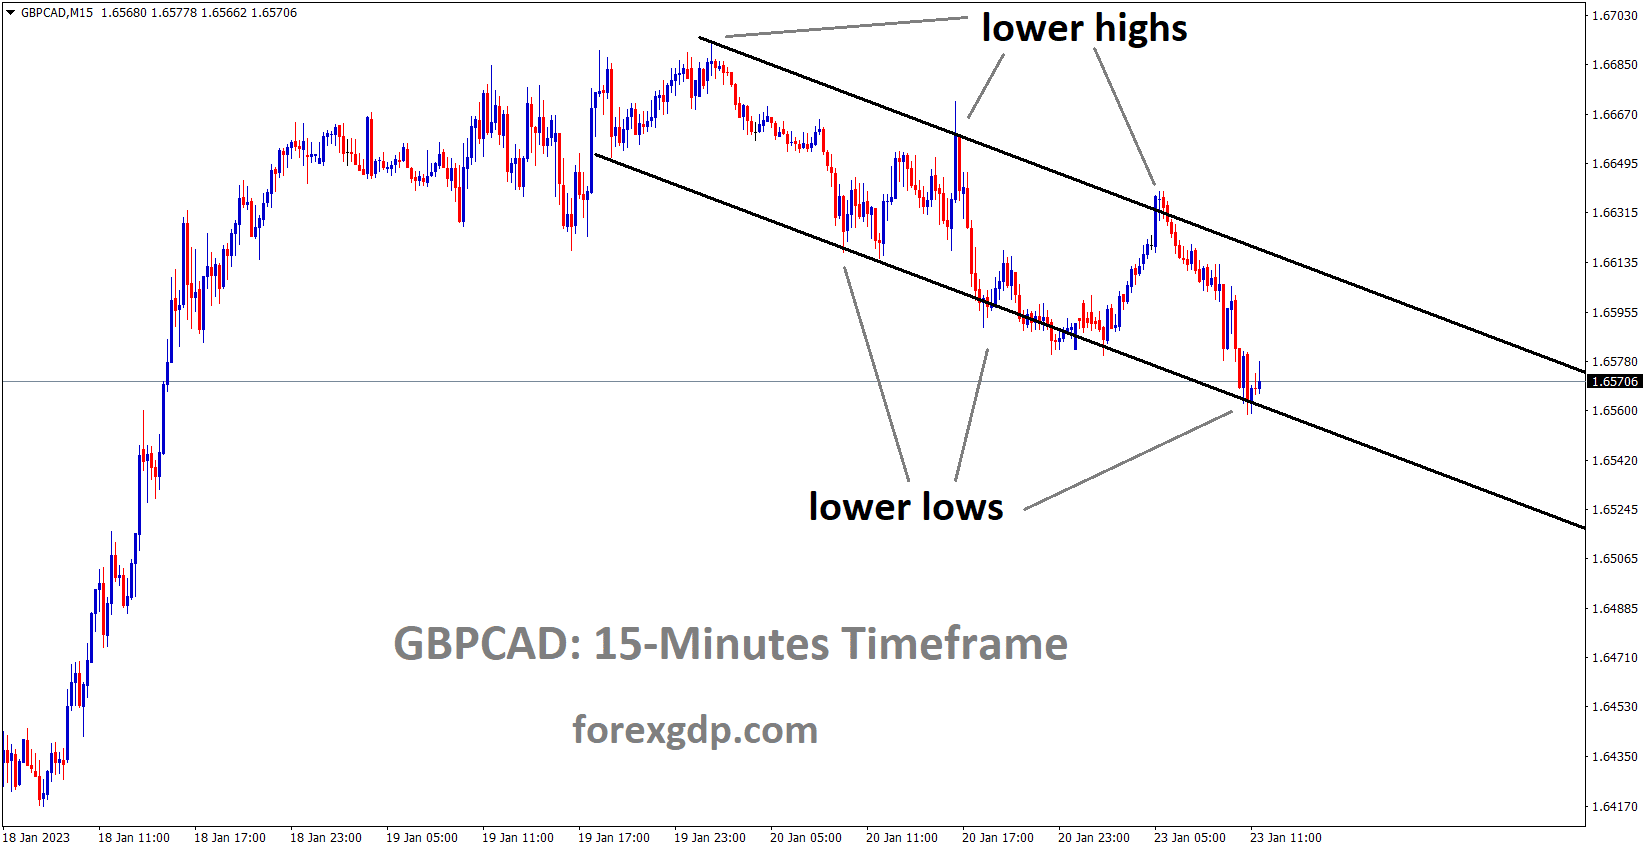 GBPCAD is moving in the Descending channel and the market has reached the lower low area of the channel